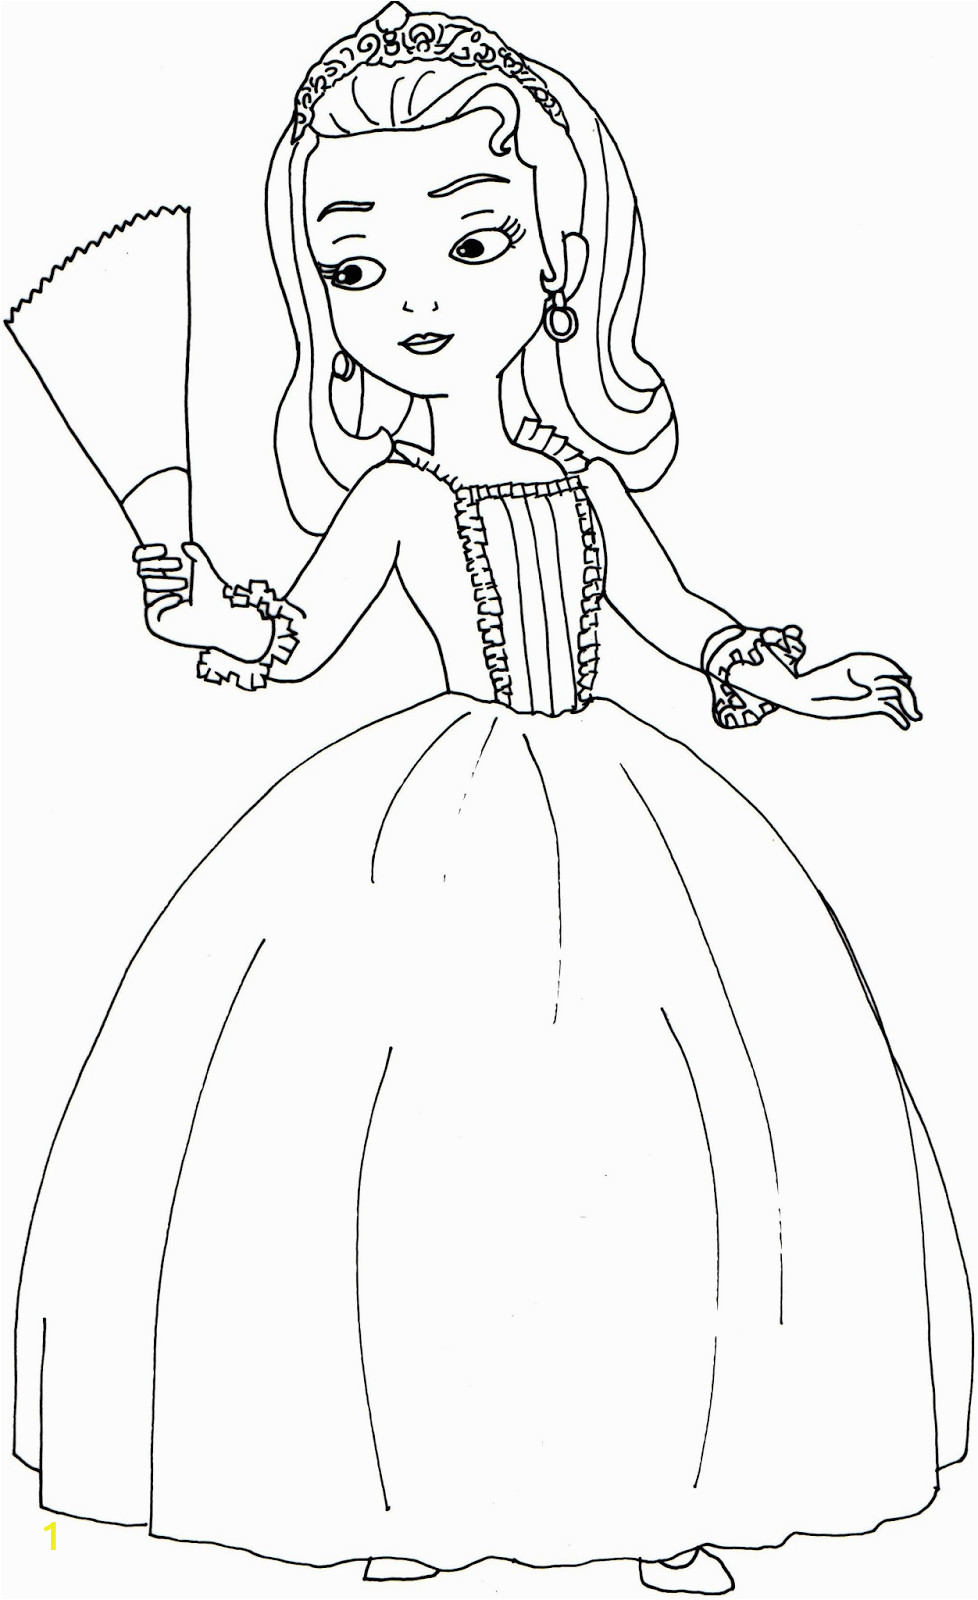 Disney Coloring Pages Tangled Rapunzel How to Draw Baby Rapunzel From Tangled